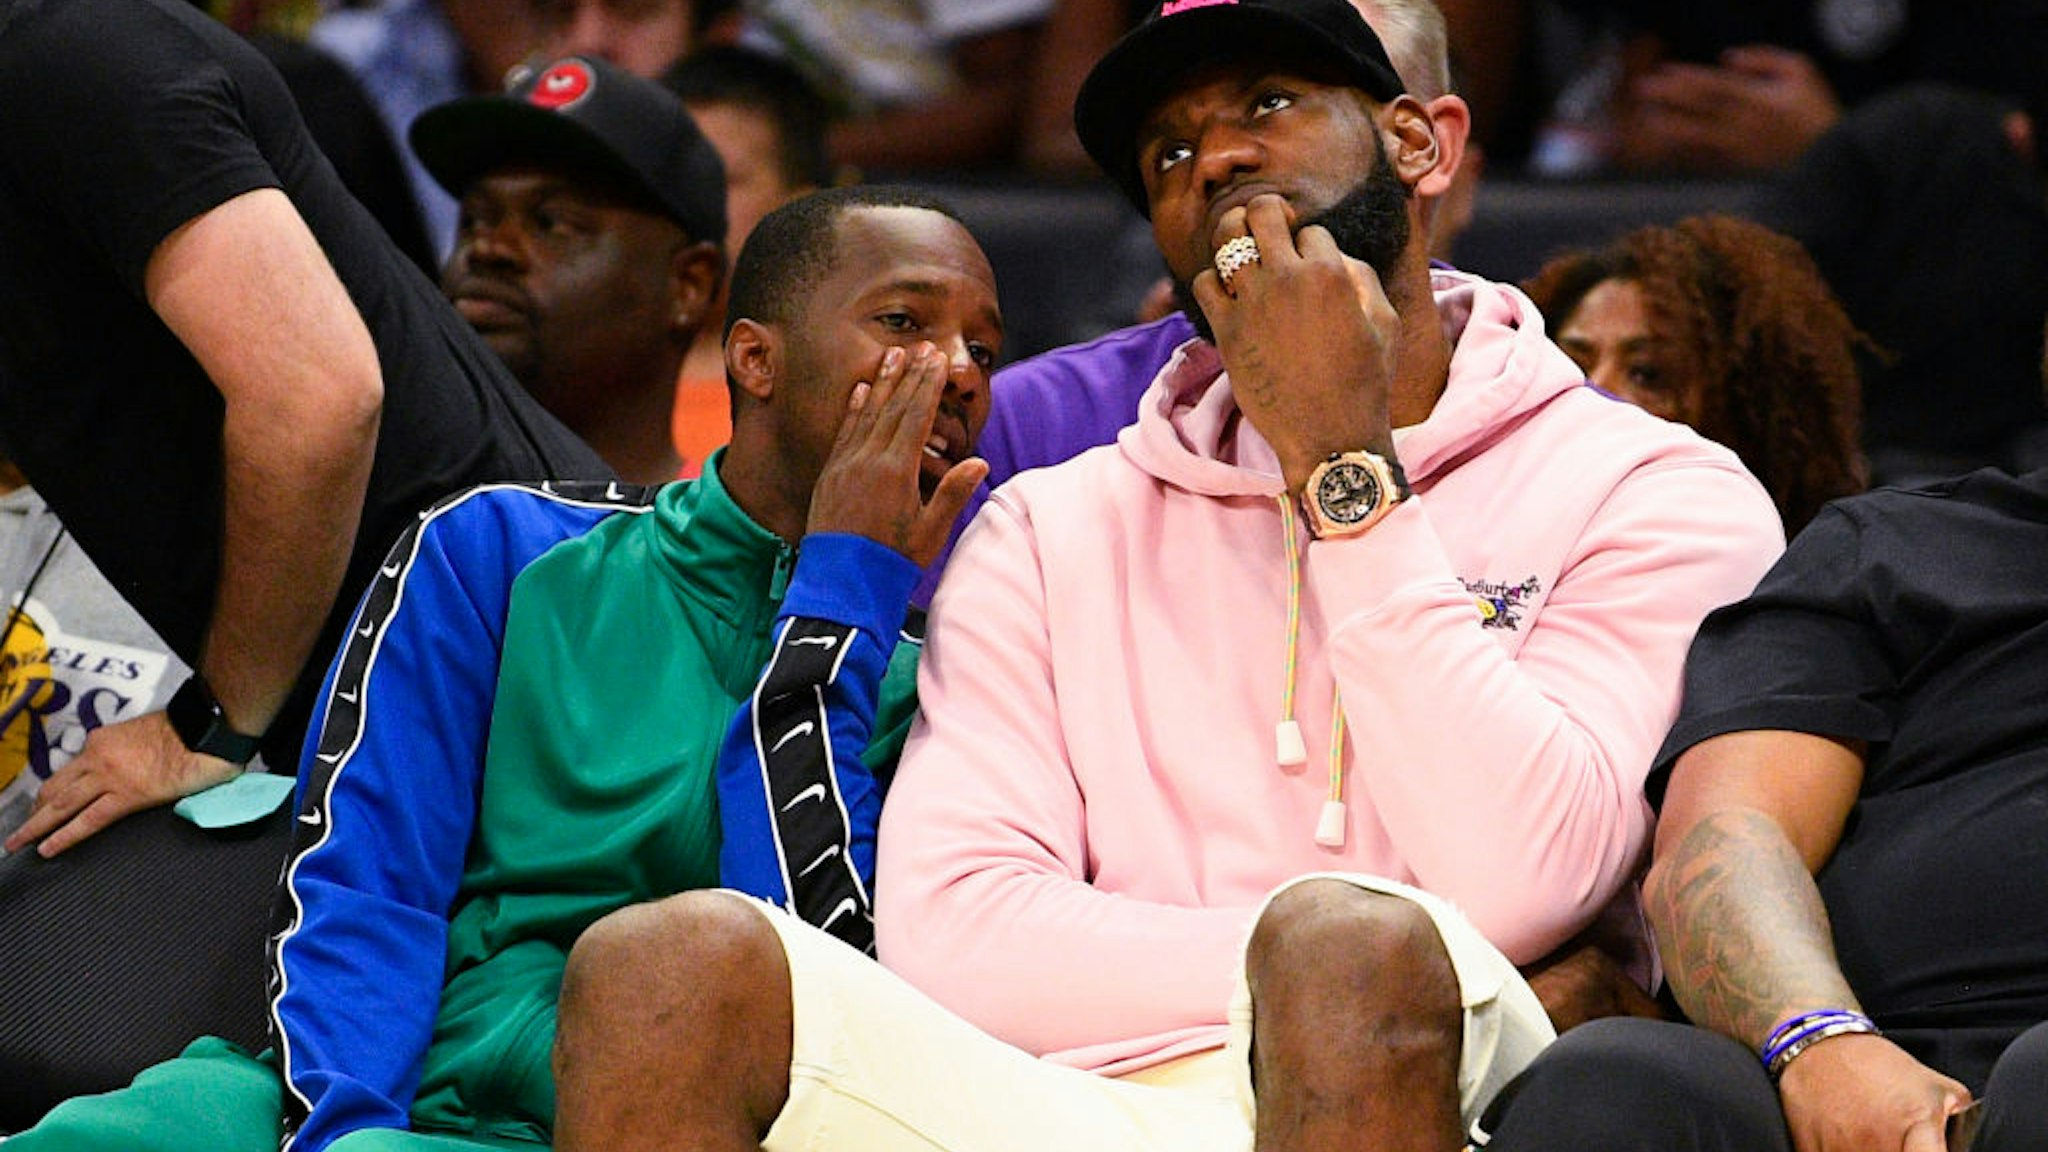 LOS ANGELES, CA - SEPTEMBER 01: Los Angeles Lakers Lebron James and his agent Rich Paul look on during the BIG3 championship game between the Triplets and the Killer 3's on September 1, 2019 at the Staples Center in Los Angeles, CA. (Photo by Brian Rothmuller/Icon Sportswire via Getty Images)